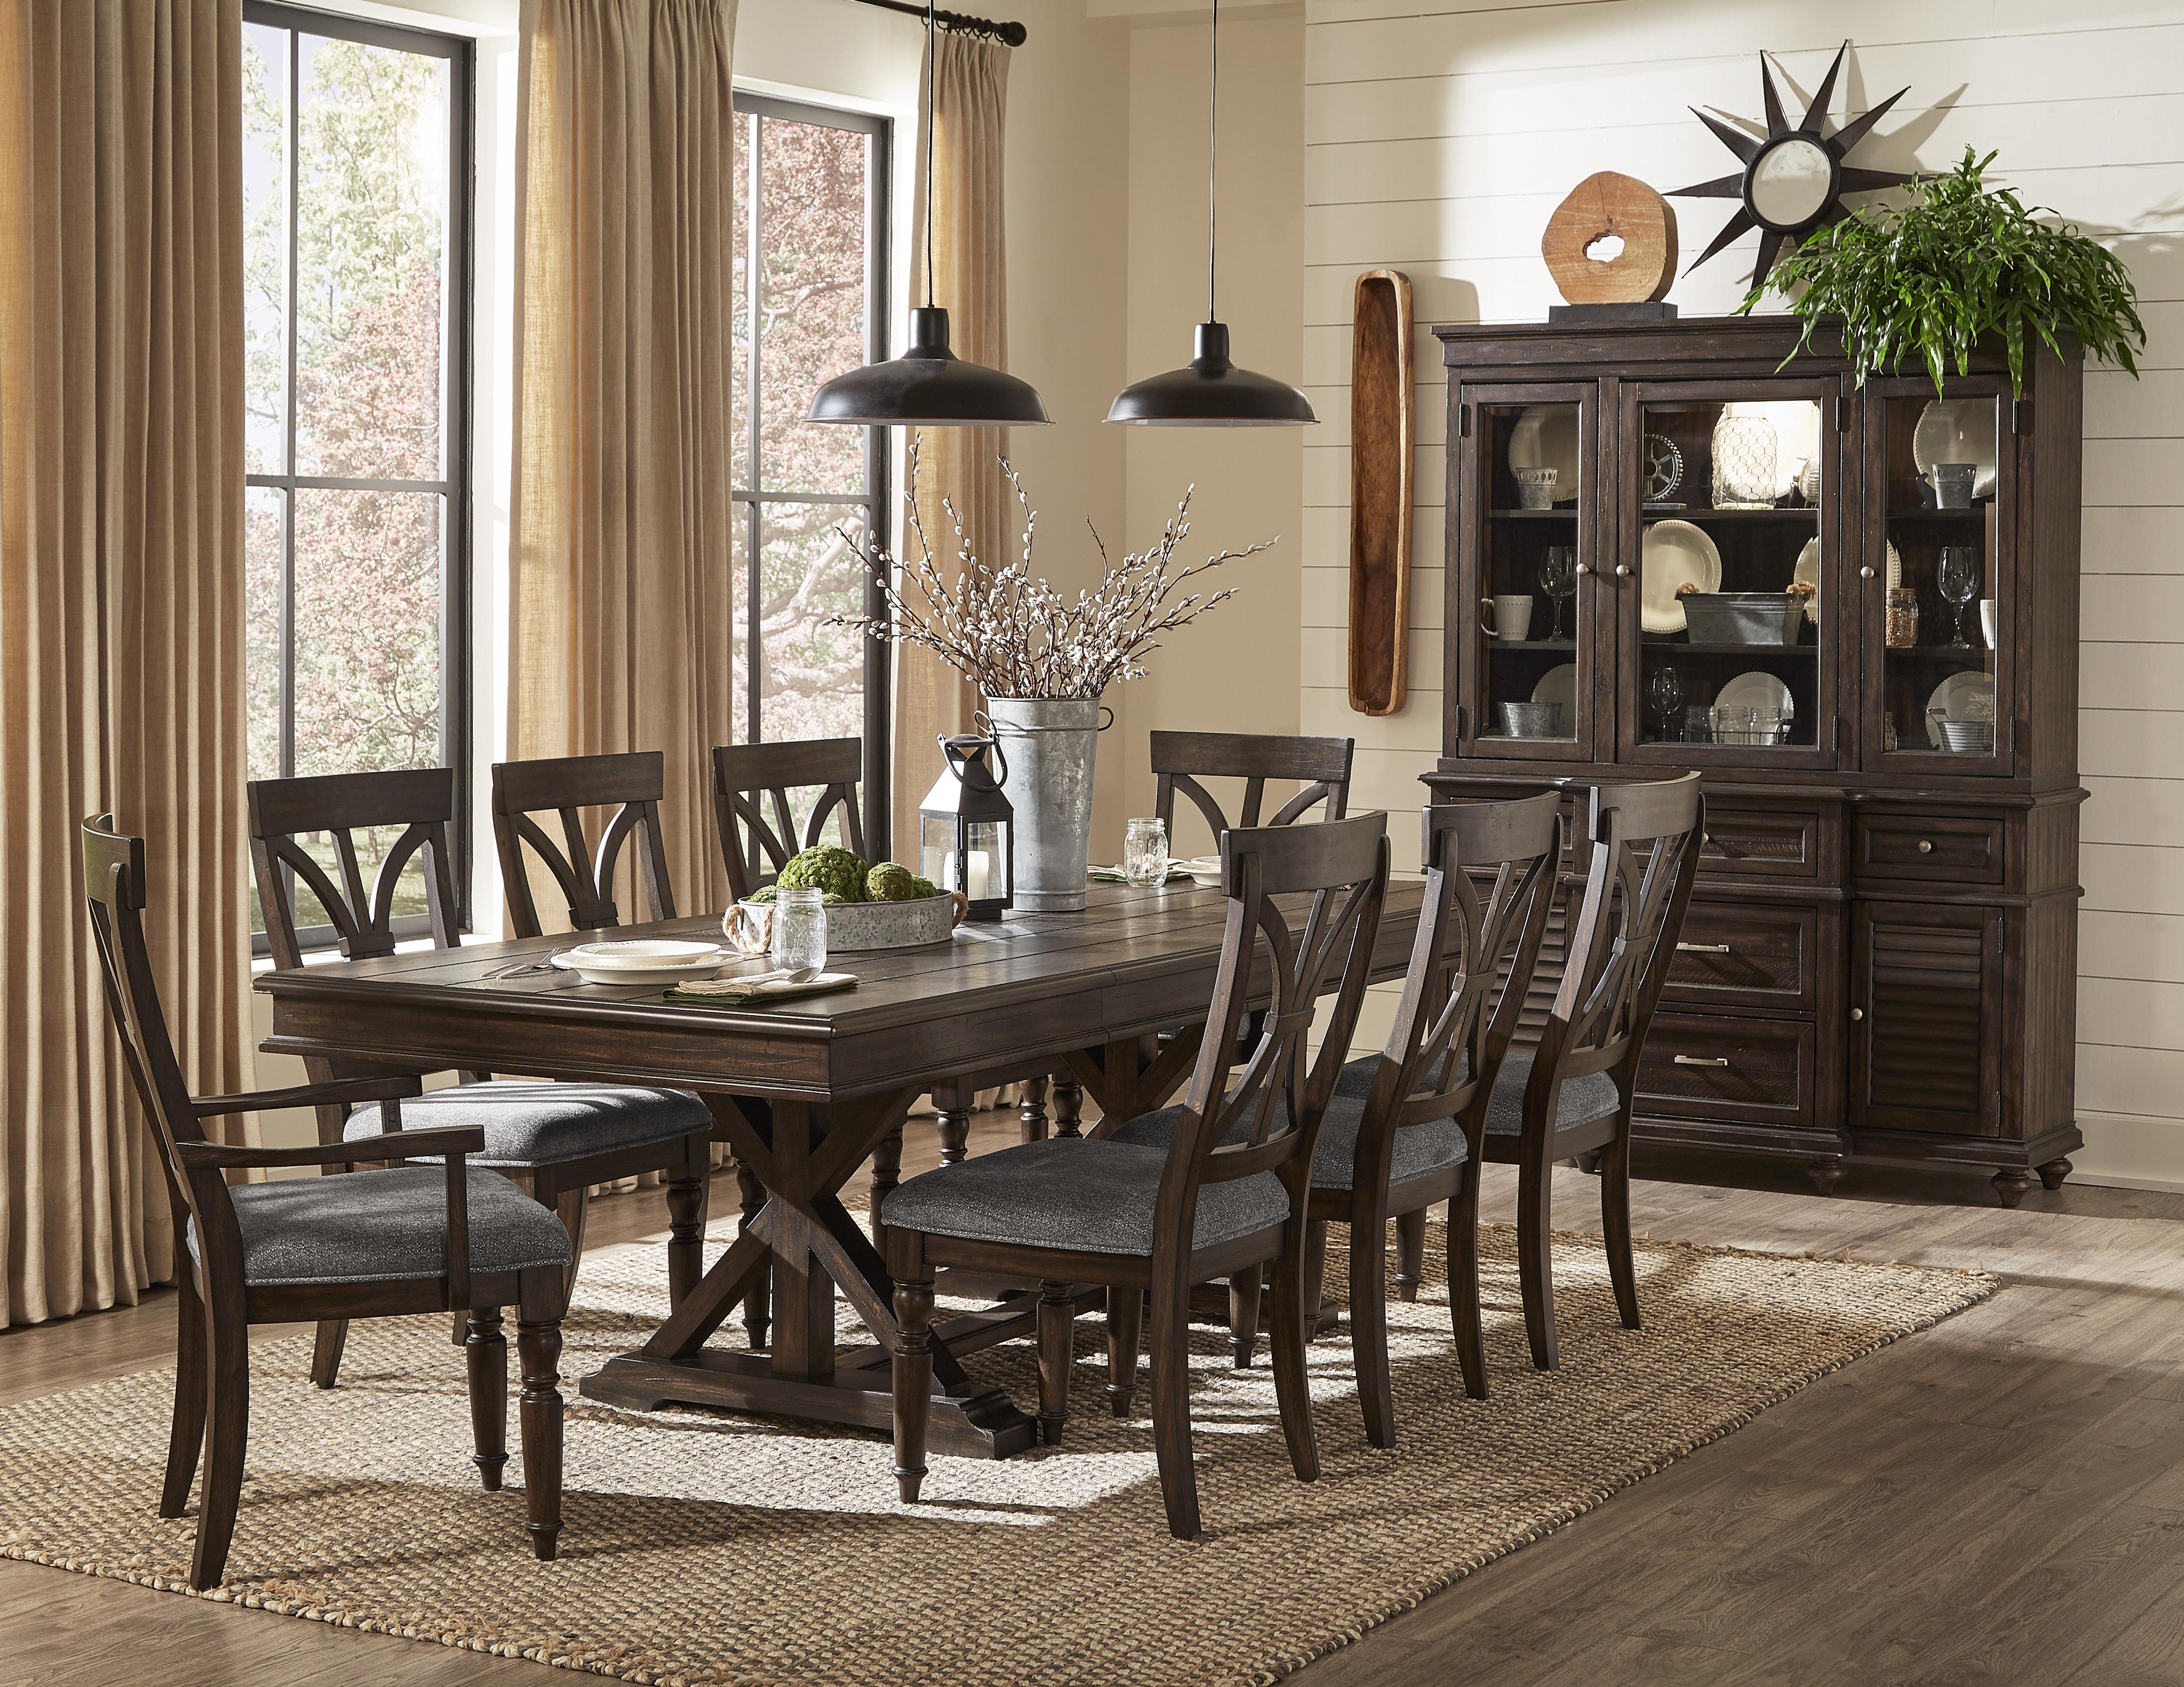 Transitional Dining Room Set 1689-96*9PC Cardano 1689-96*9PC in Charcoal Polyester